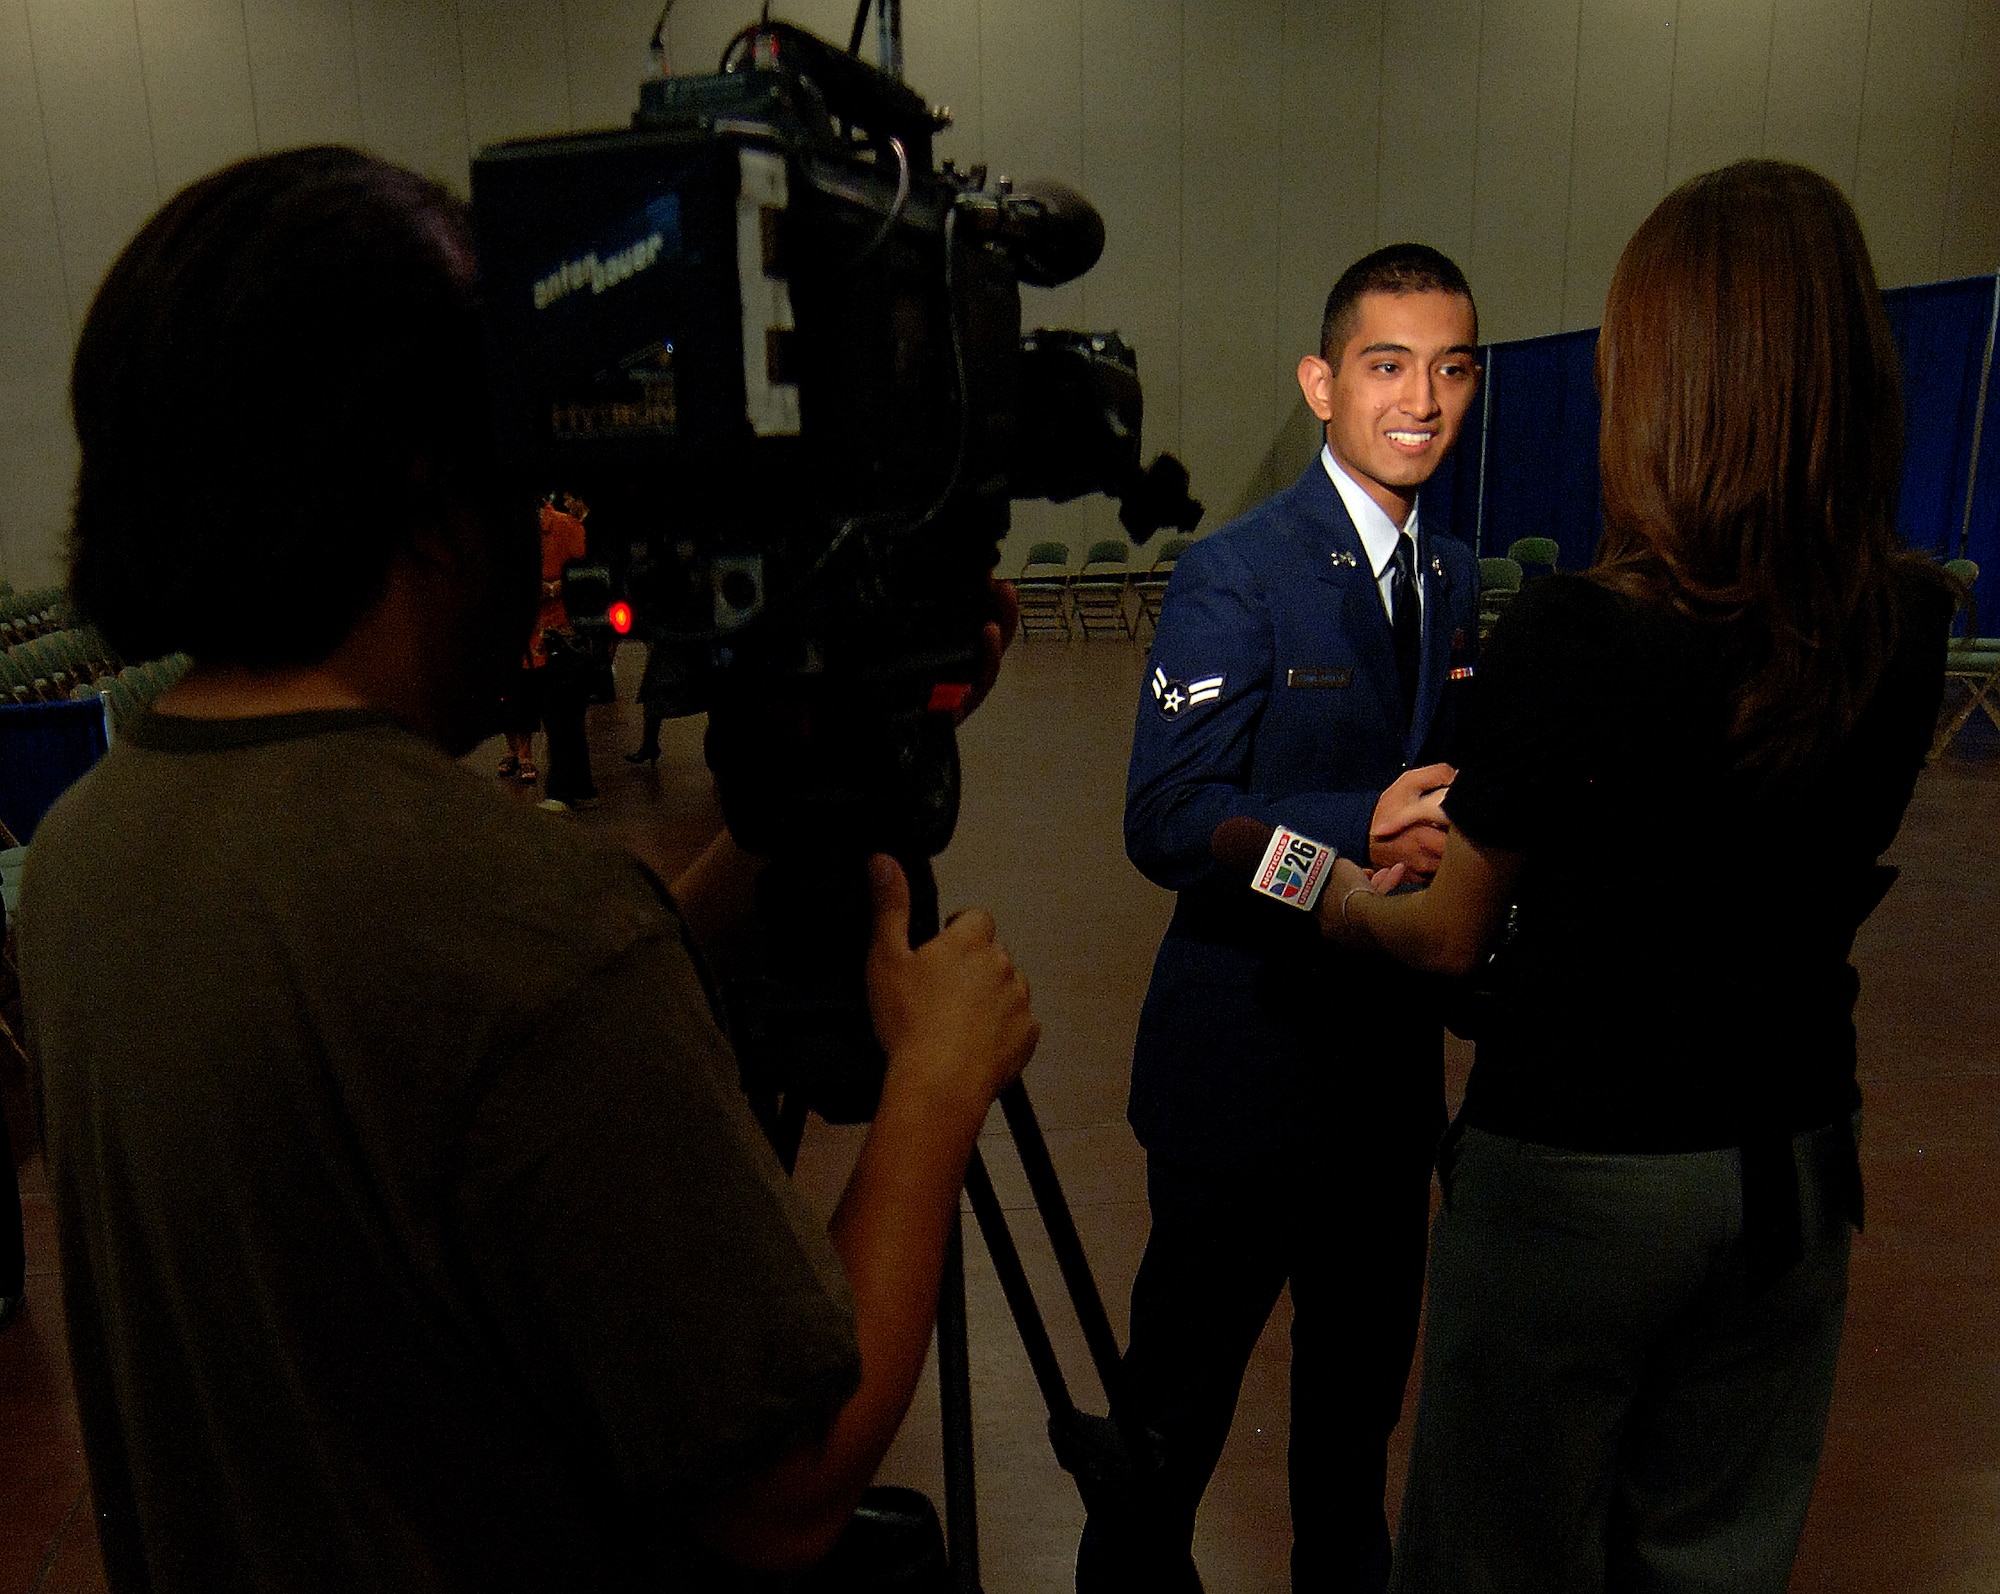 Airman 1st Class Jesse Lerma, 49th Mission Support Group, is interviewed  by Univision's Ms. Heidi Renpenning, after his naturalization ceremony, September 24. More than 1200 applicants were granted U.S. citizenship at the Convention and Performing Arts Center that was transformed into a federal court room in El Paso, Texas.  (U.S. Air Force photo/Airman 1st Class Michael Means)